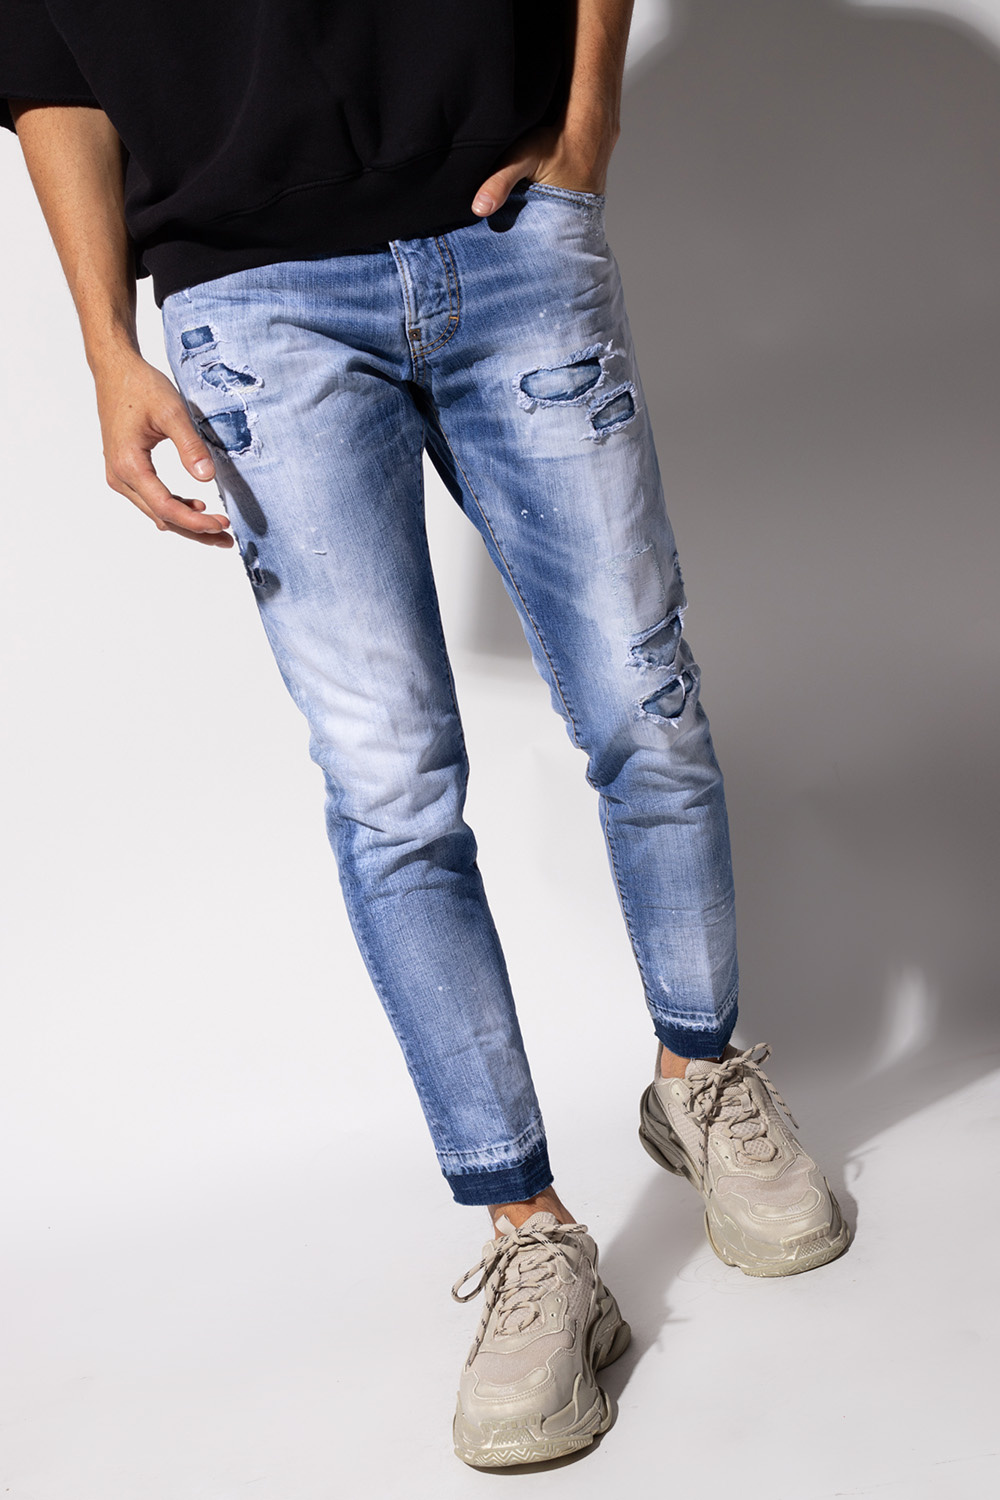 Dsquared2 'Cool Guy Cropped' jeans   Men's Clothing   Vitkac